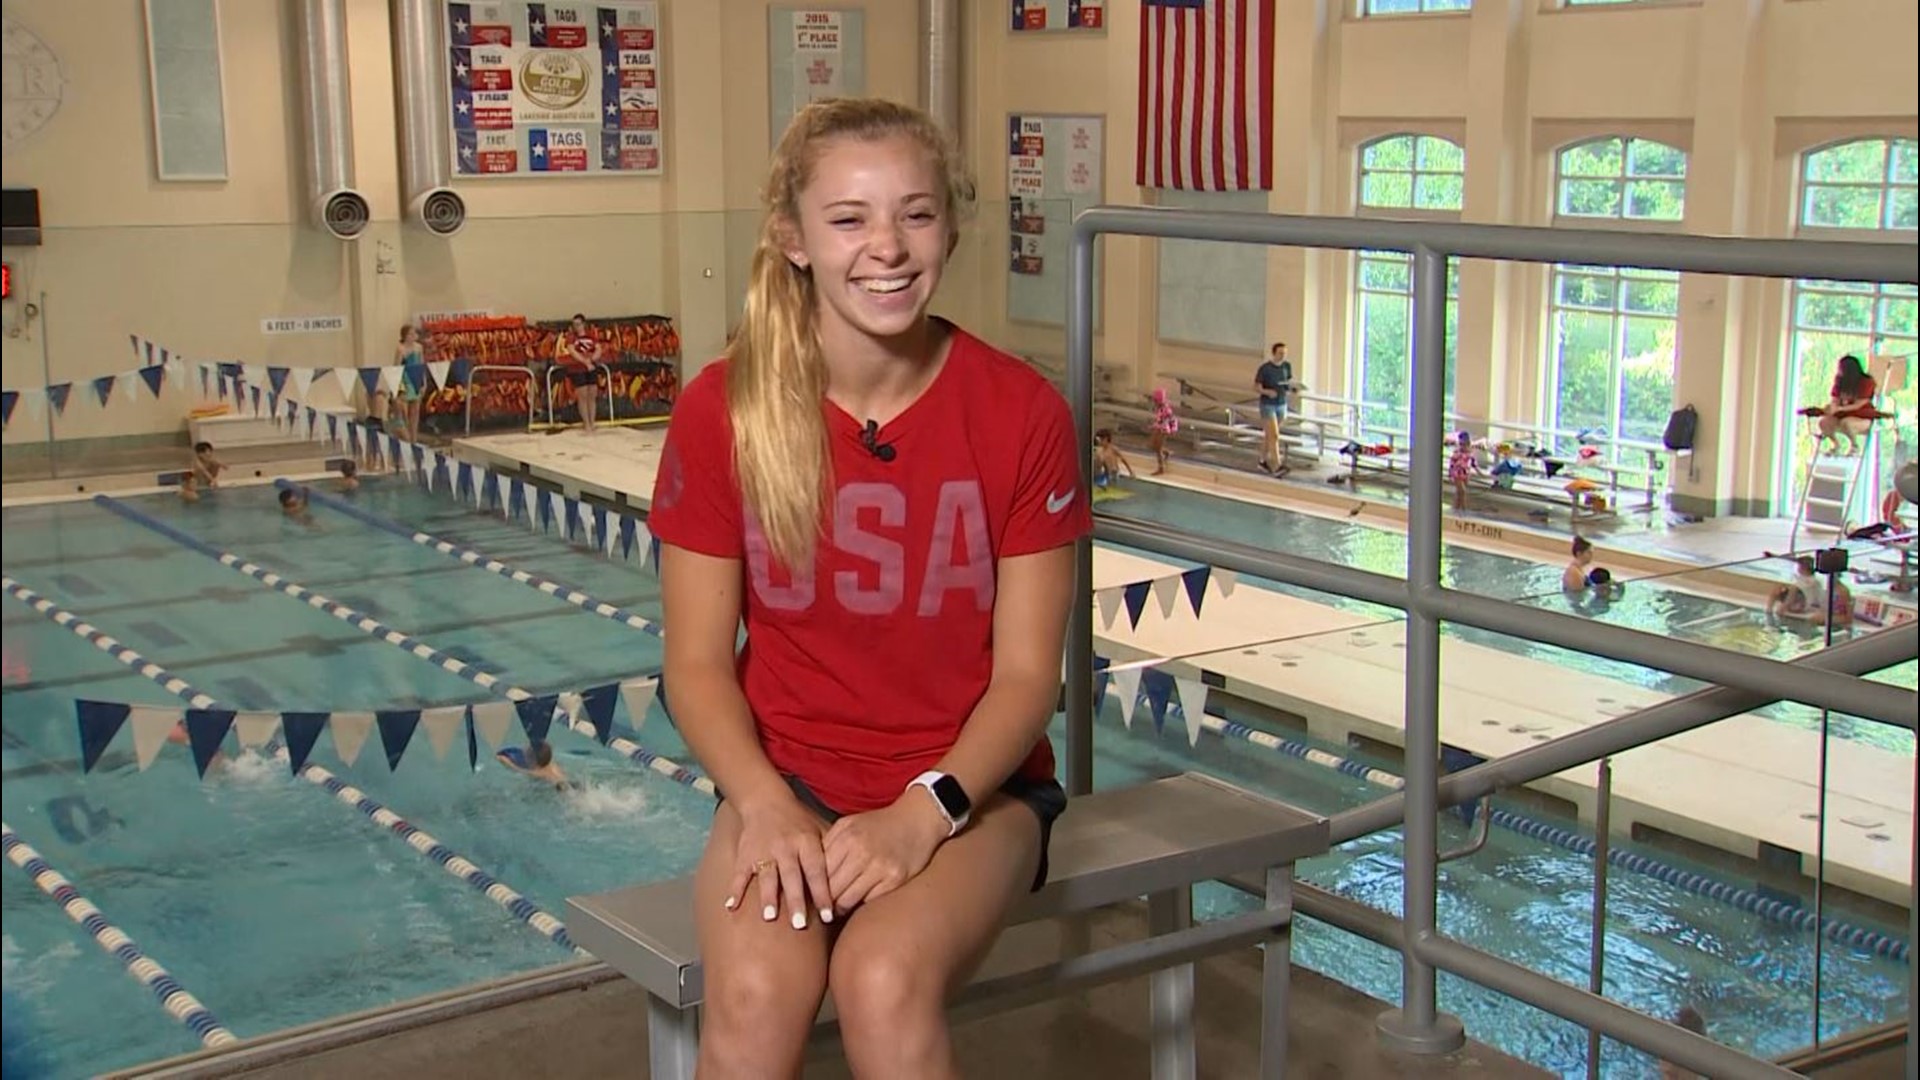 Hailey Hernandez is the youngest female diver going to Tokyo for Team USA at age 18, according to Team USA.